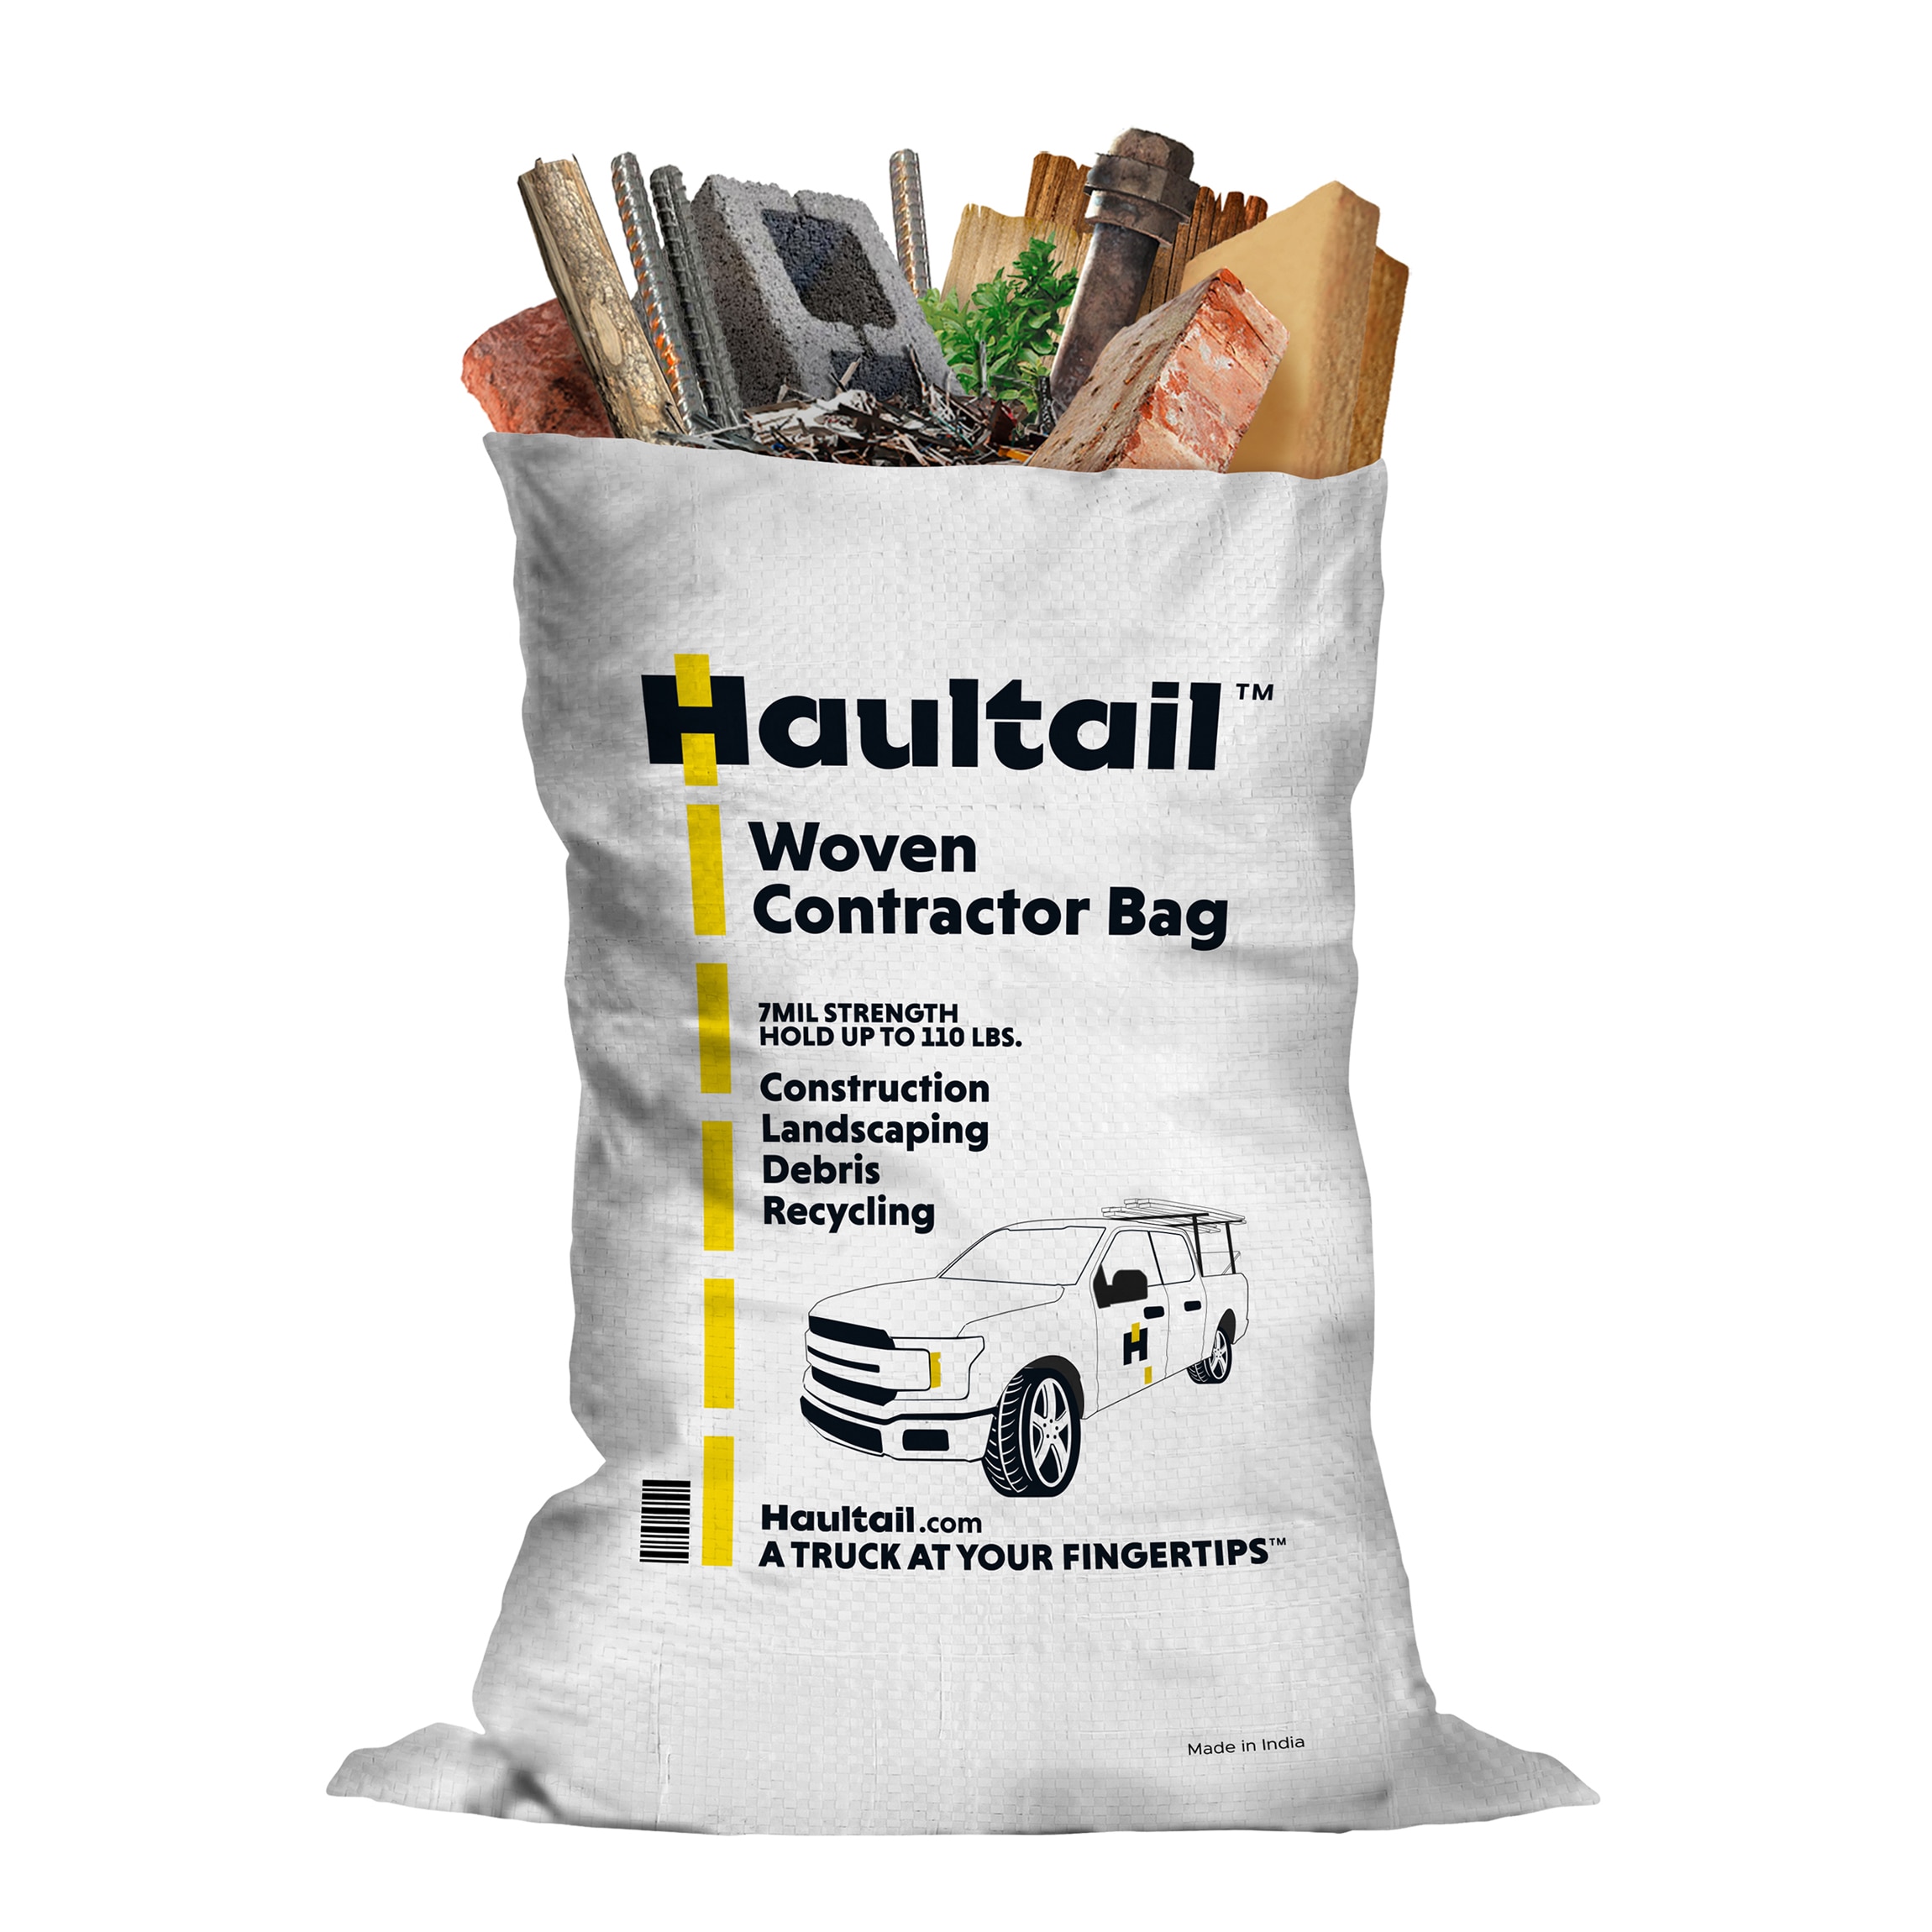 Grip-Rite 42 Gal. Heavy-Duty Contractor Black Trash Bag (20-Count) - Valu  Home Centers